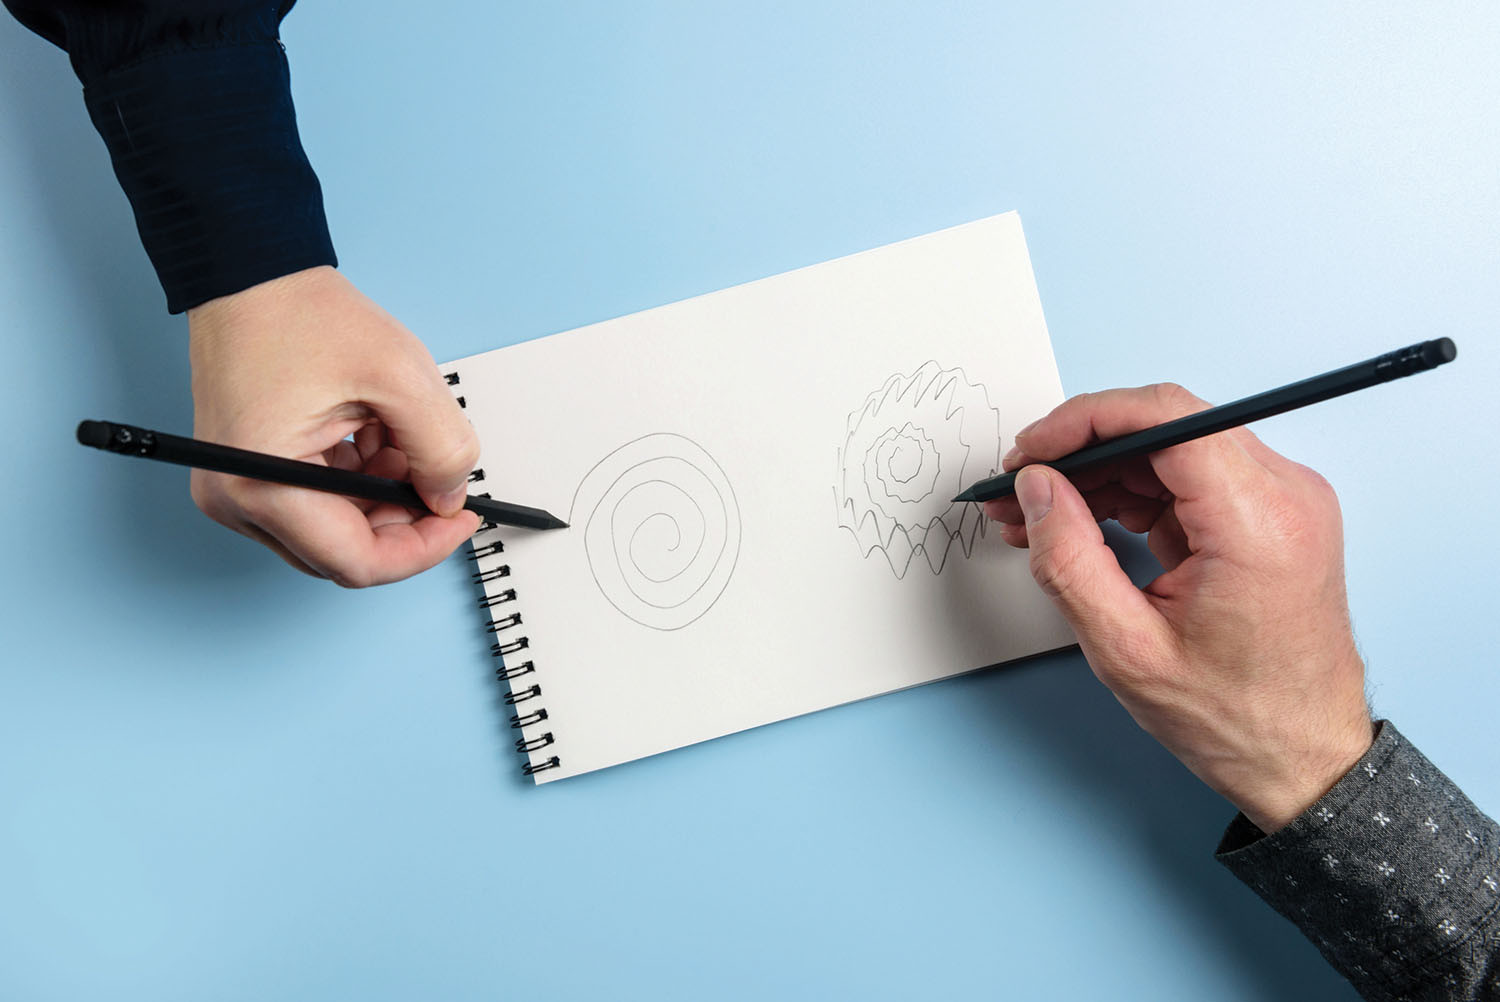 photo of two hands holding pencils and drawing on the same piece of paper, hand on the left has drawn a smooth concentric line while the hand on the right has drawn shakily